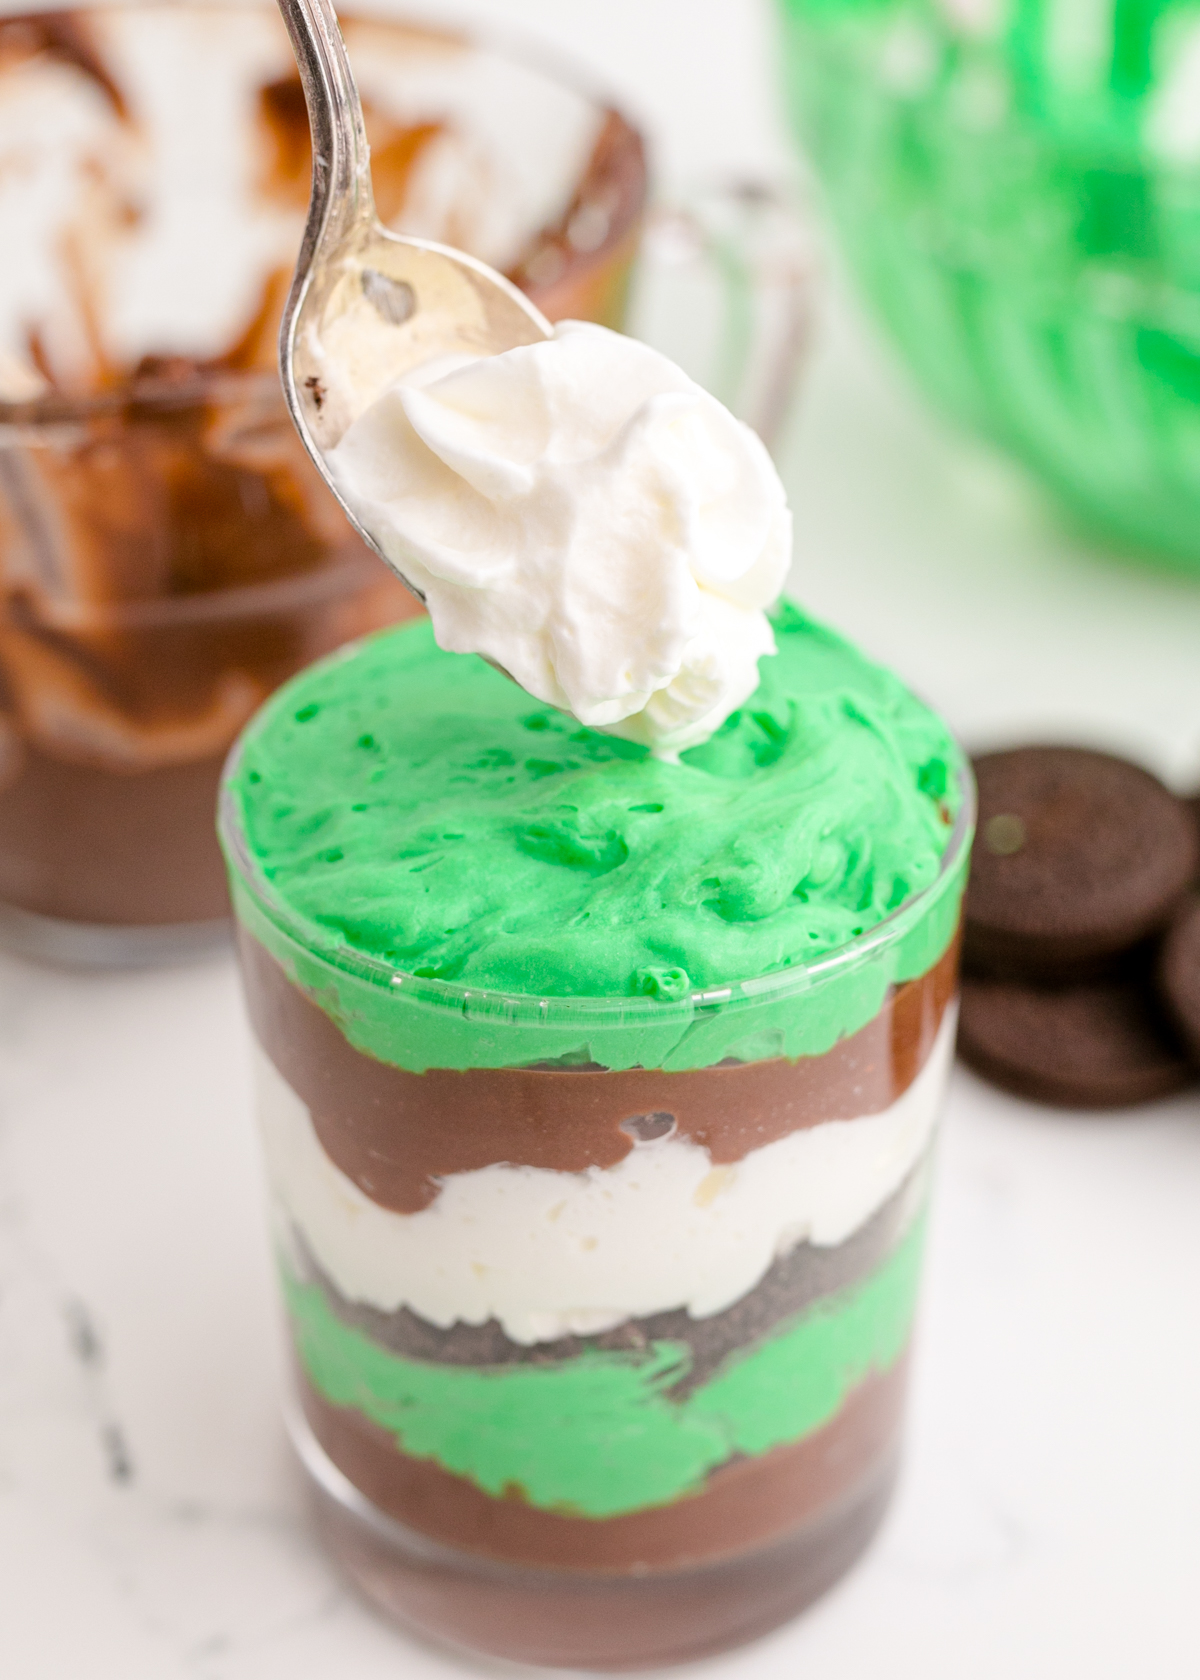 layered pudding cups for St. Patrick's Day